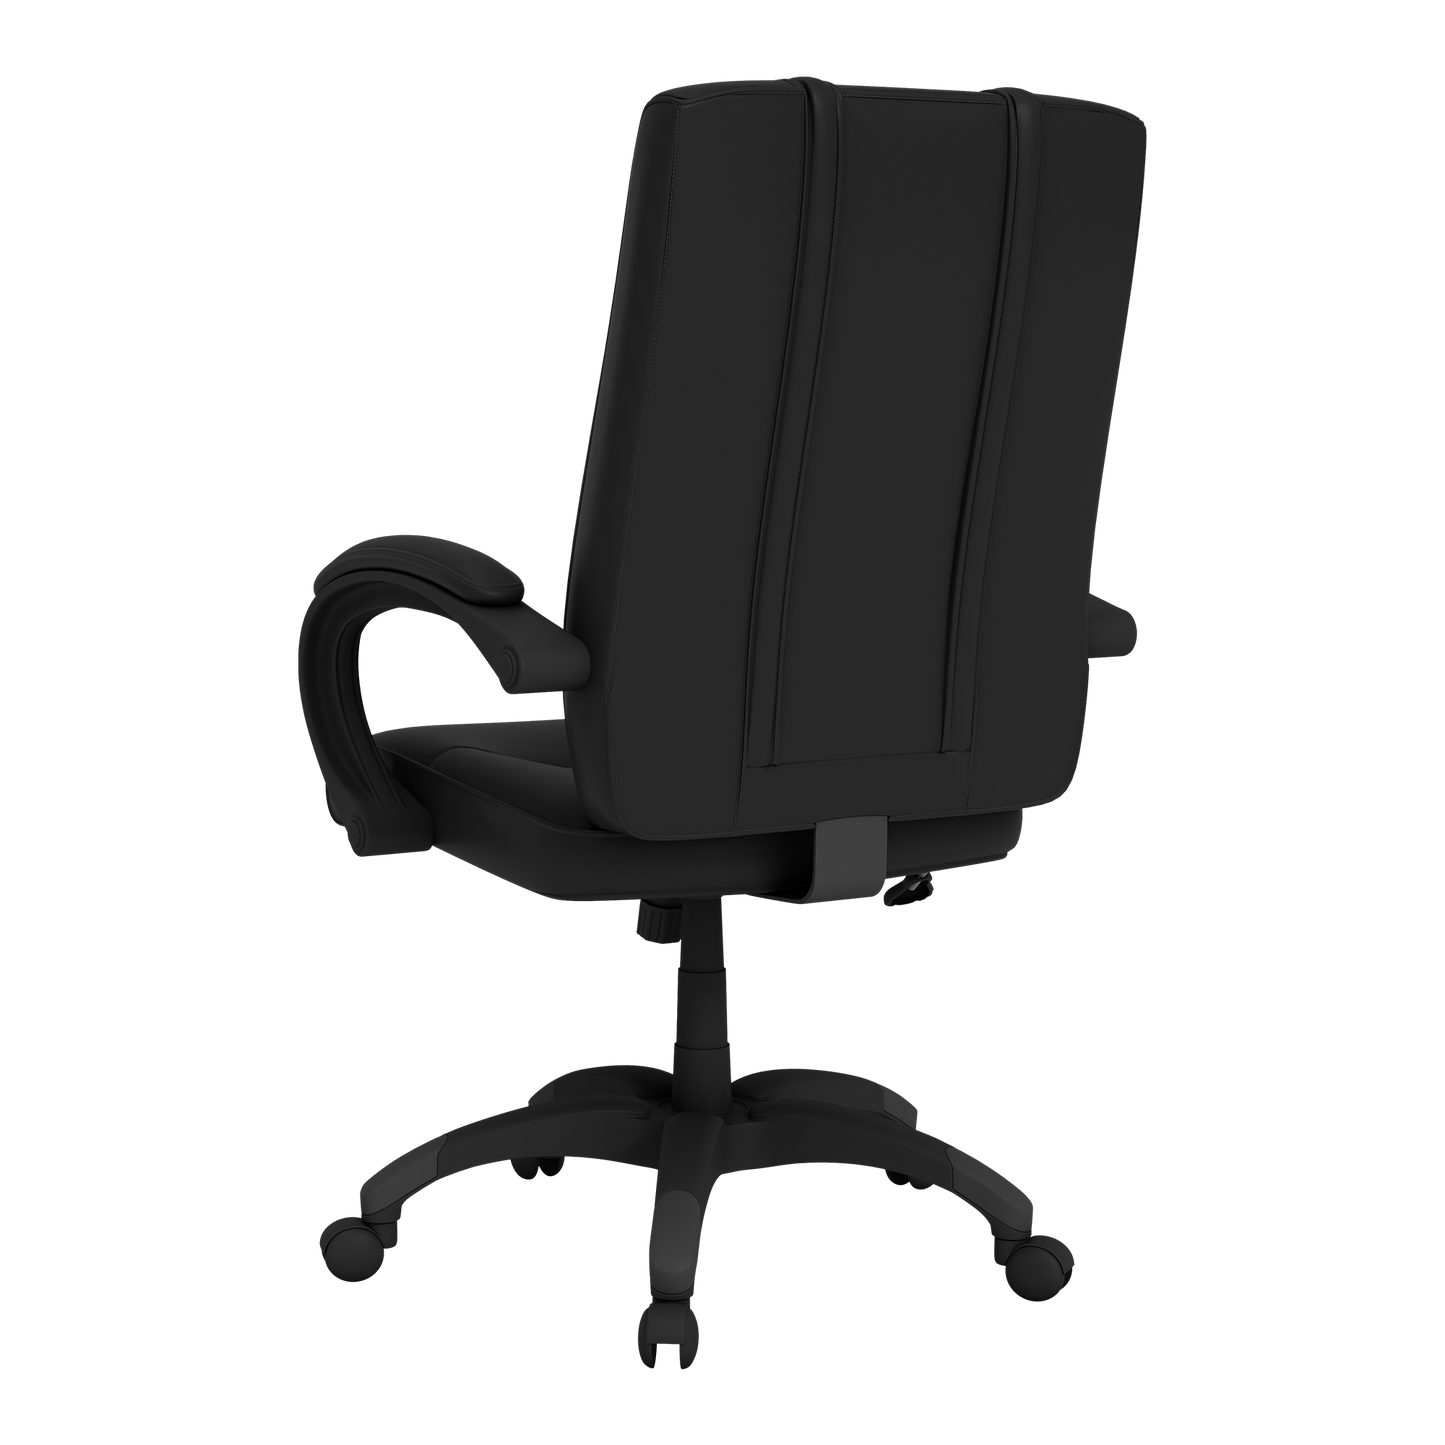 Office Chair 1000 with  Detroit Lions Helmet Logo